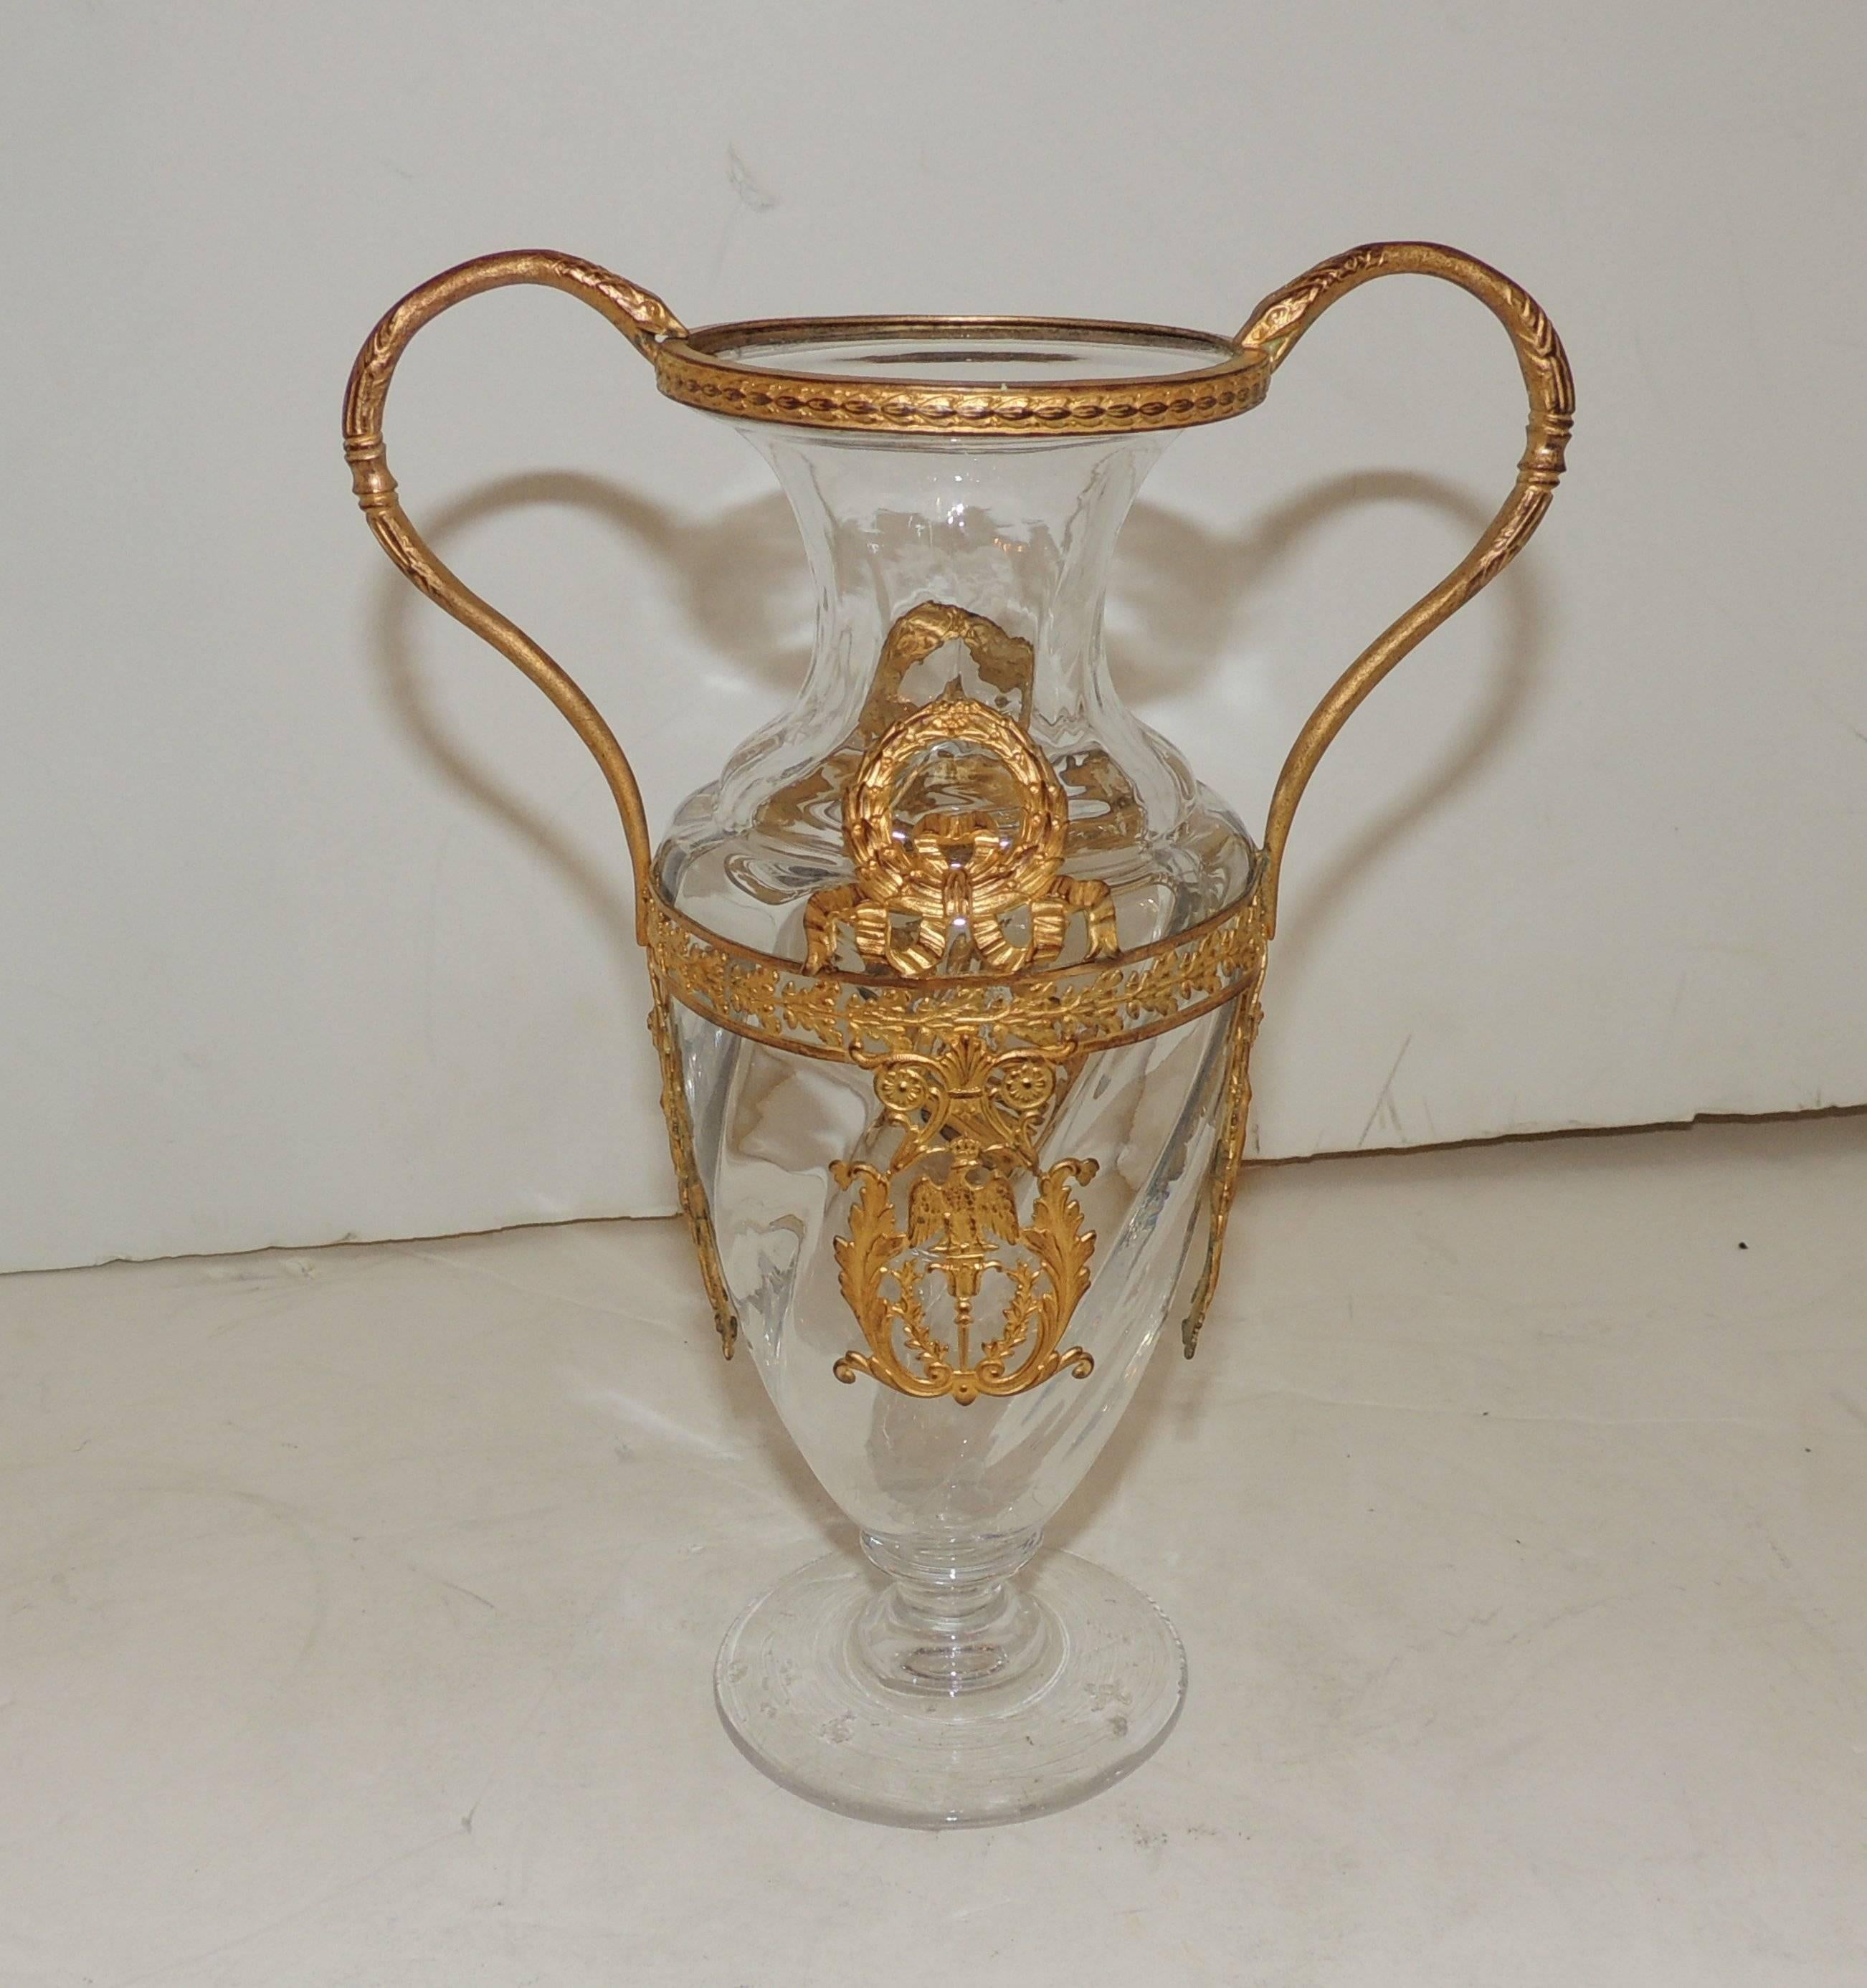 Wonderful crystal pedestal vase with draped wreath and floral details and ribbon accents. Finely detailed bronze though out the top and bottom rim. There are female figures with wraths on each handle.

There are minor chips on the bottom.